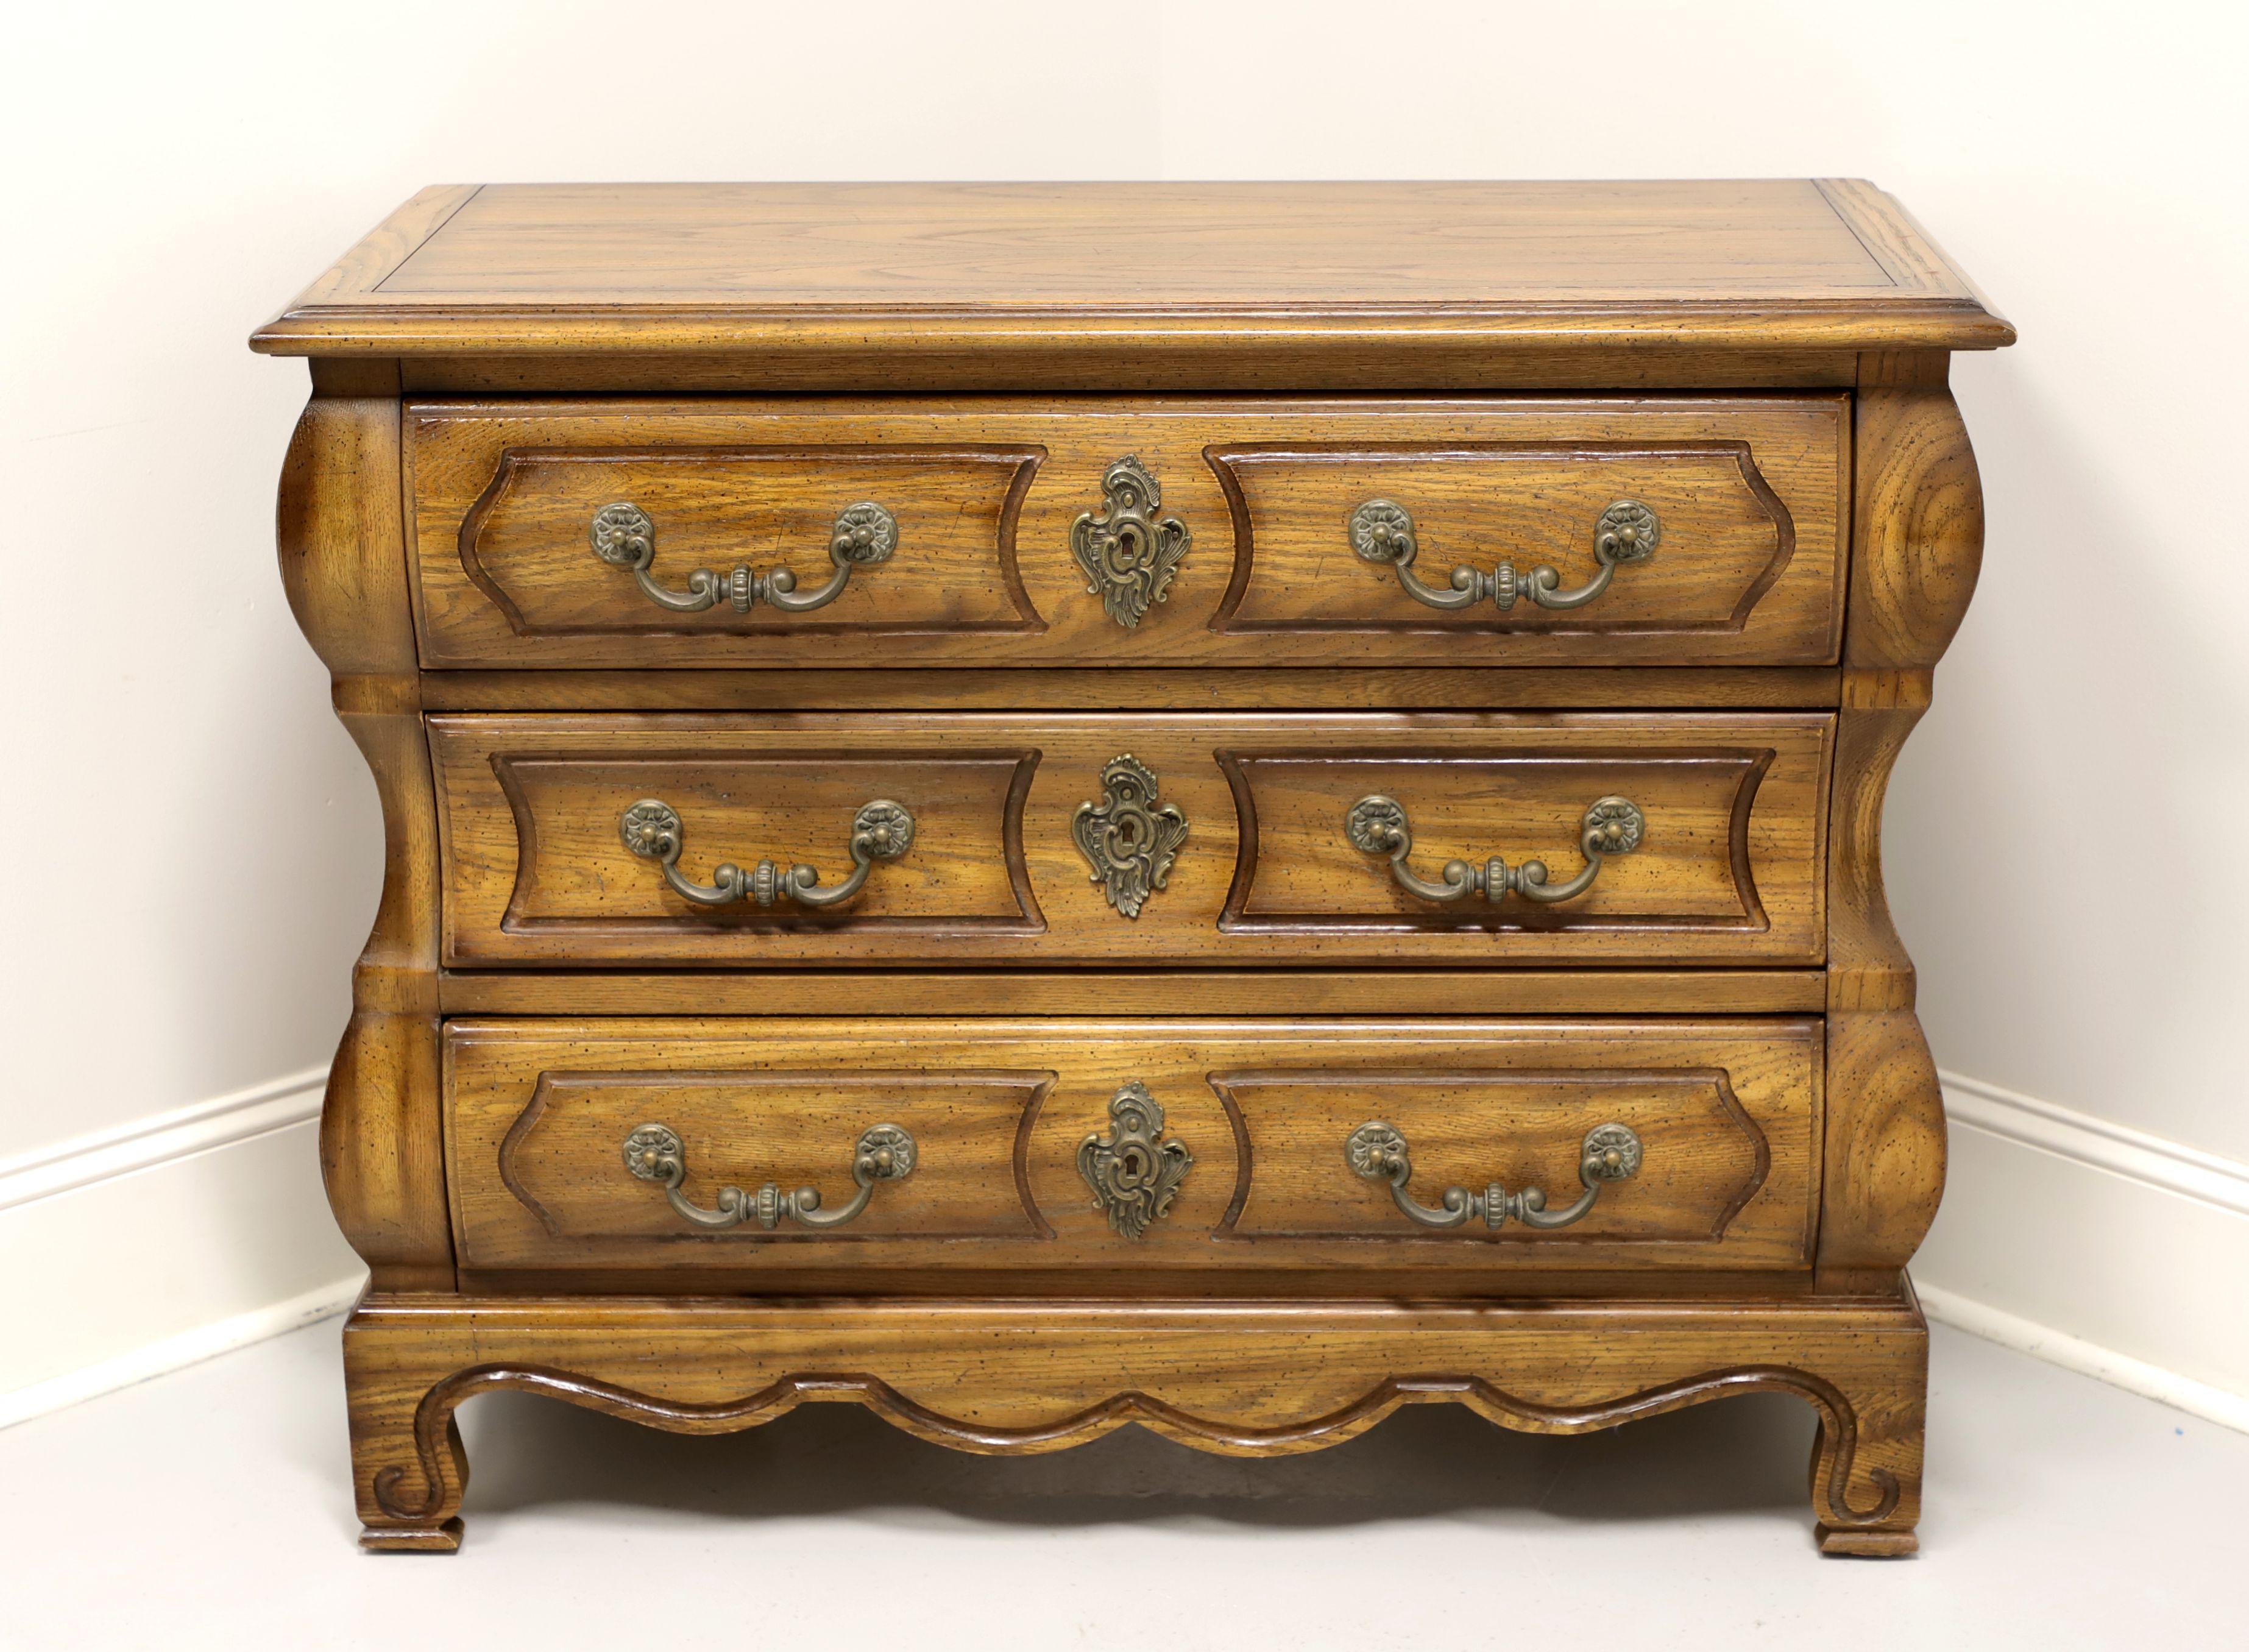 A French Country style bombe bachelor chest, by Century Furniture. Solid oak, brass hardware, bombe style, carved apron and feet. Features three drawers of dovetail construction with faux keyhole escutcheons. Made in the USA, in the late 20th